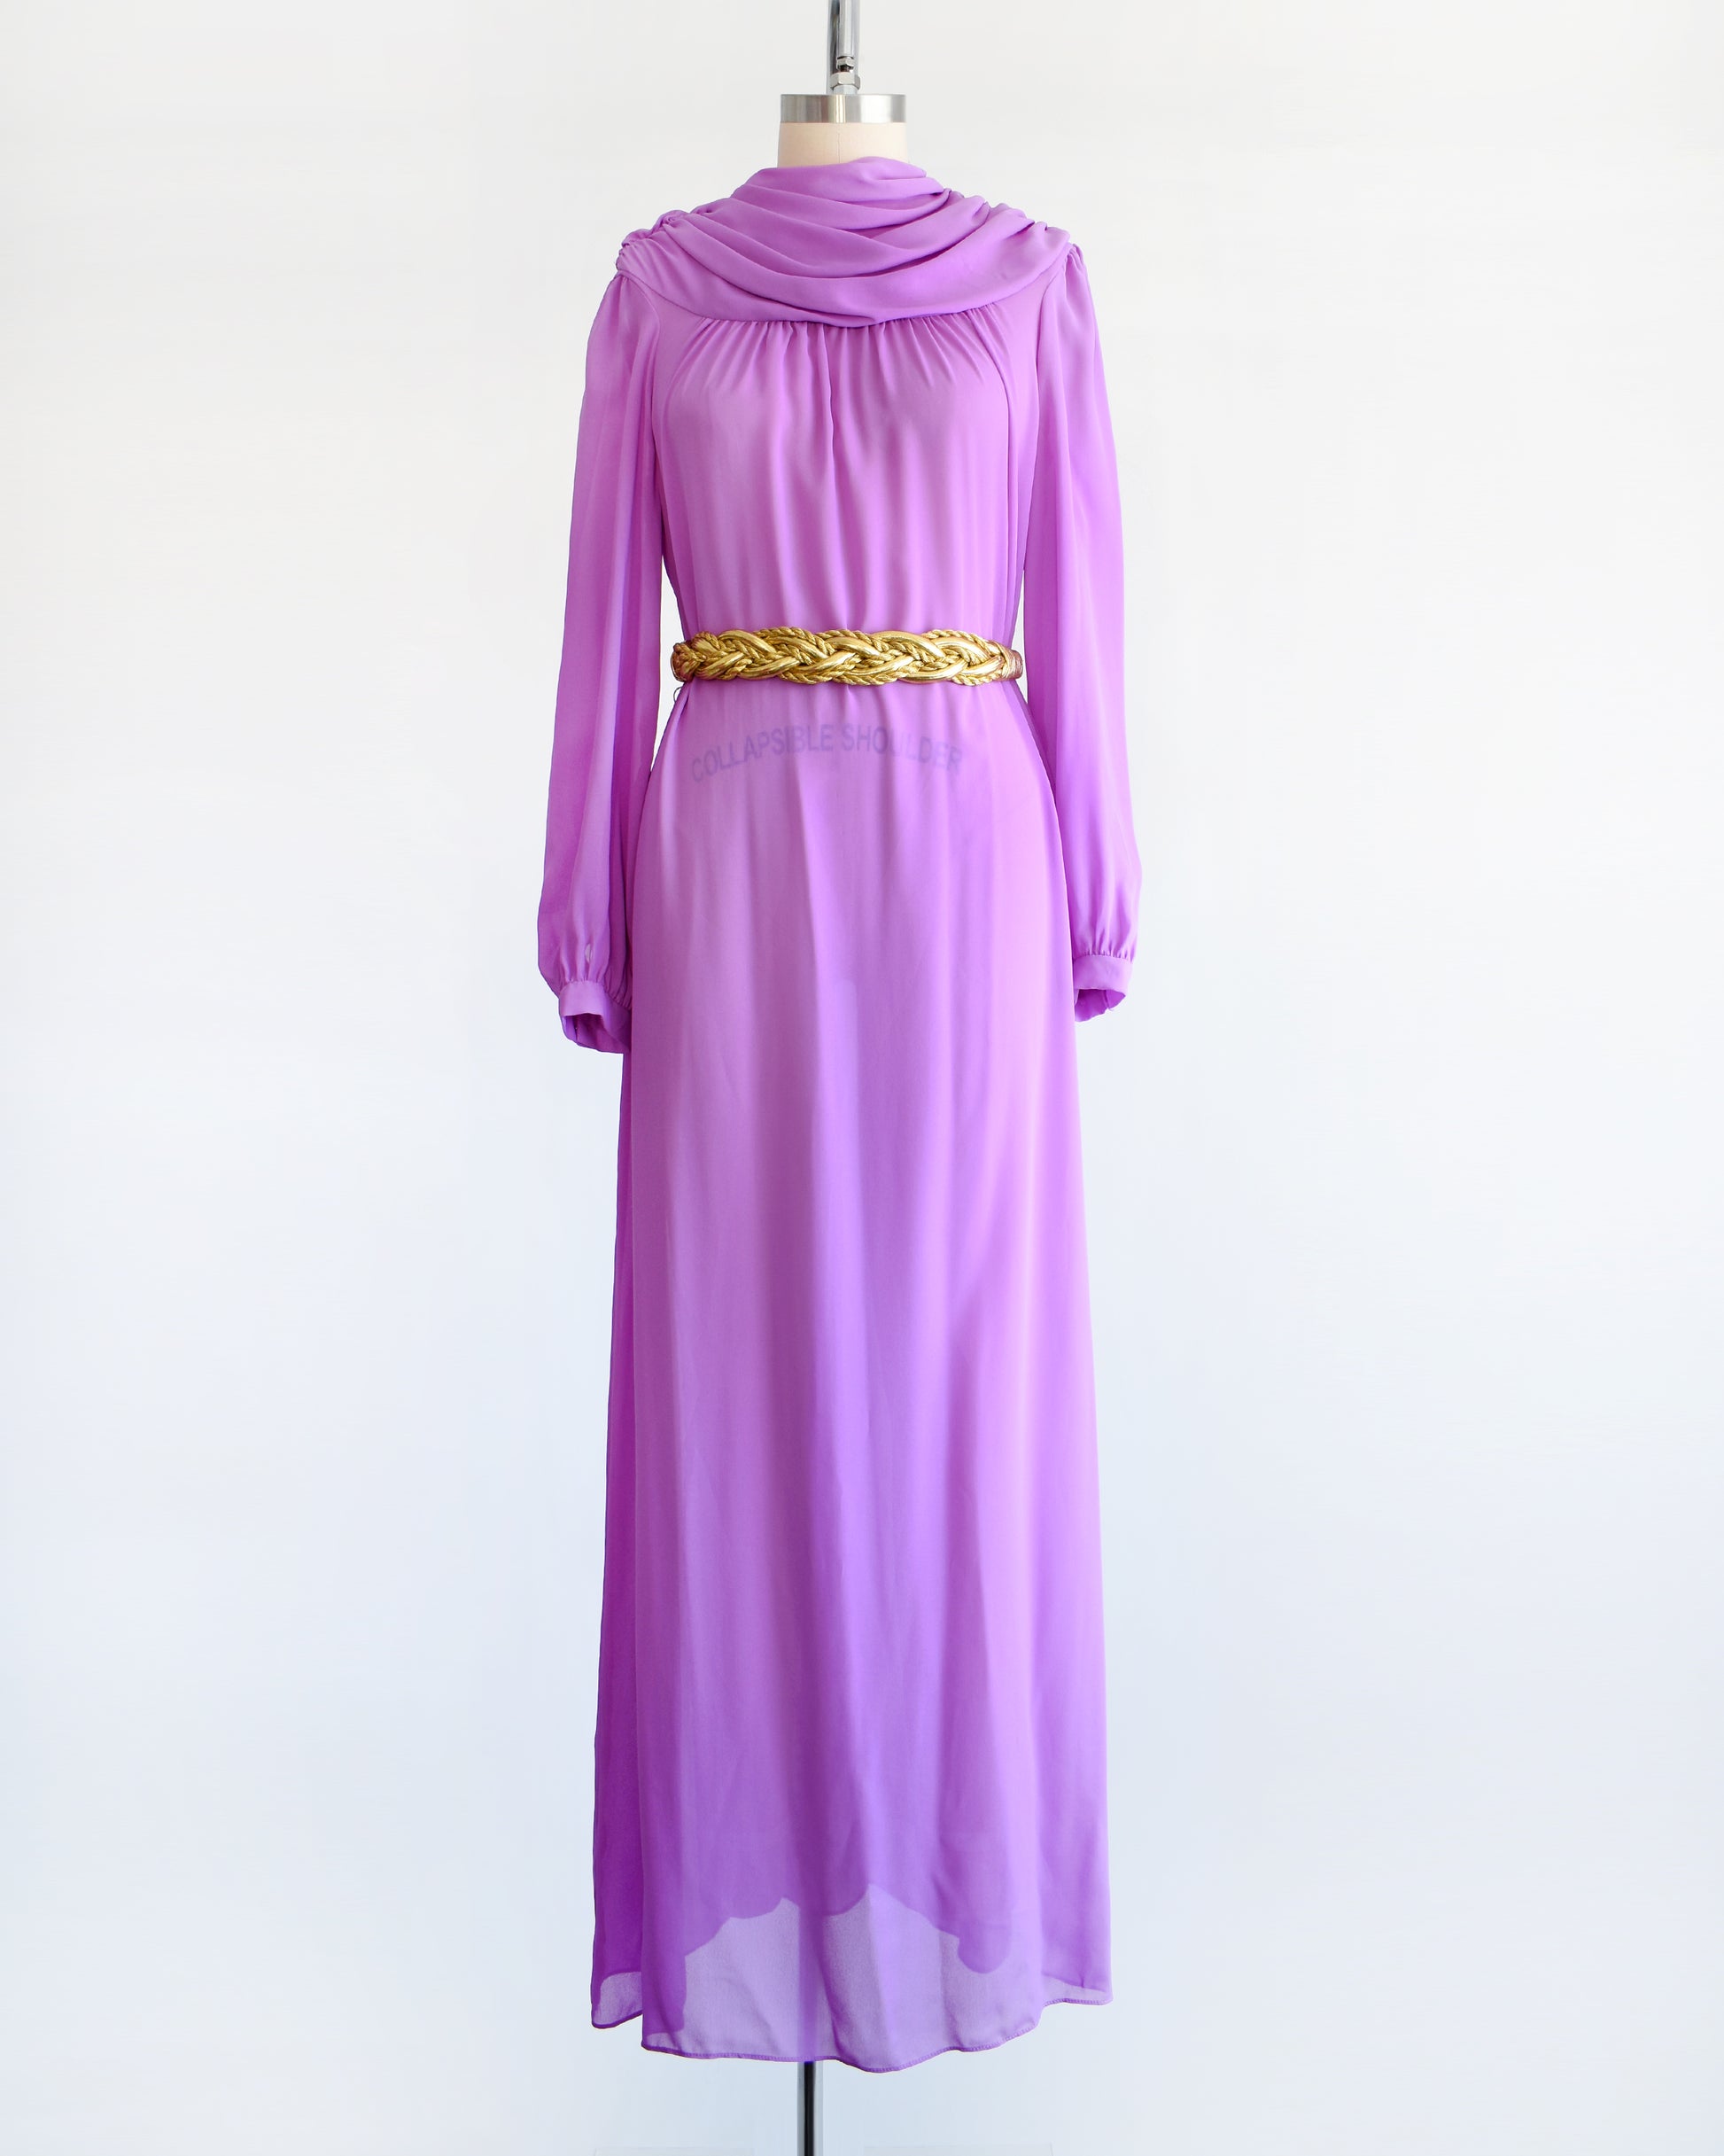 A vintage 1970s purple semi sheer maxi dress by Joy Stevens California that has a draped neckline and long sleeves and a gold belt that is just for show and not included